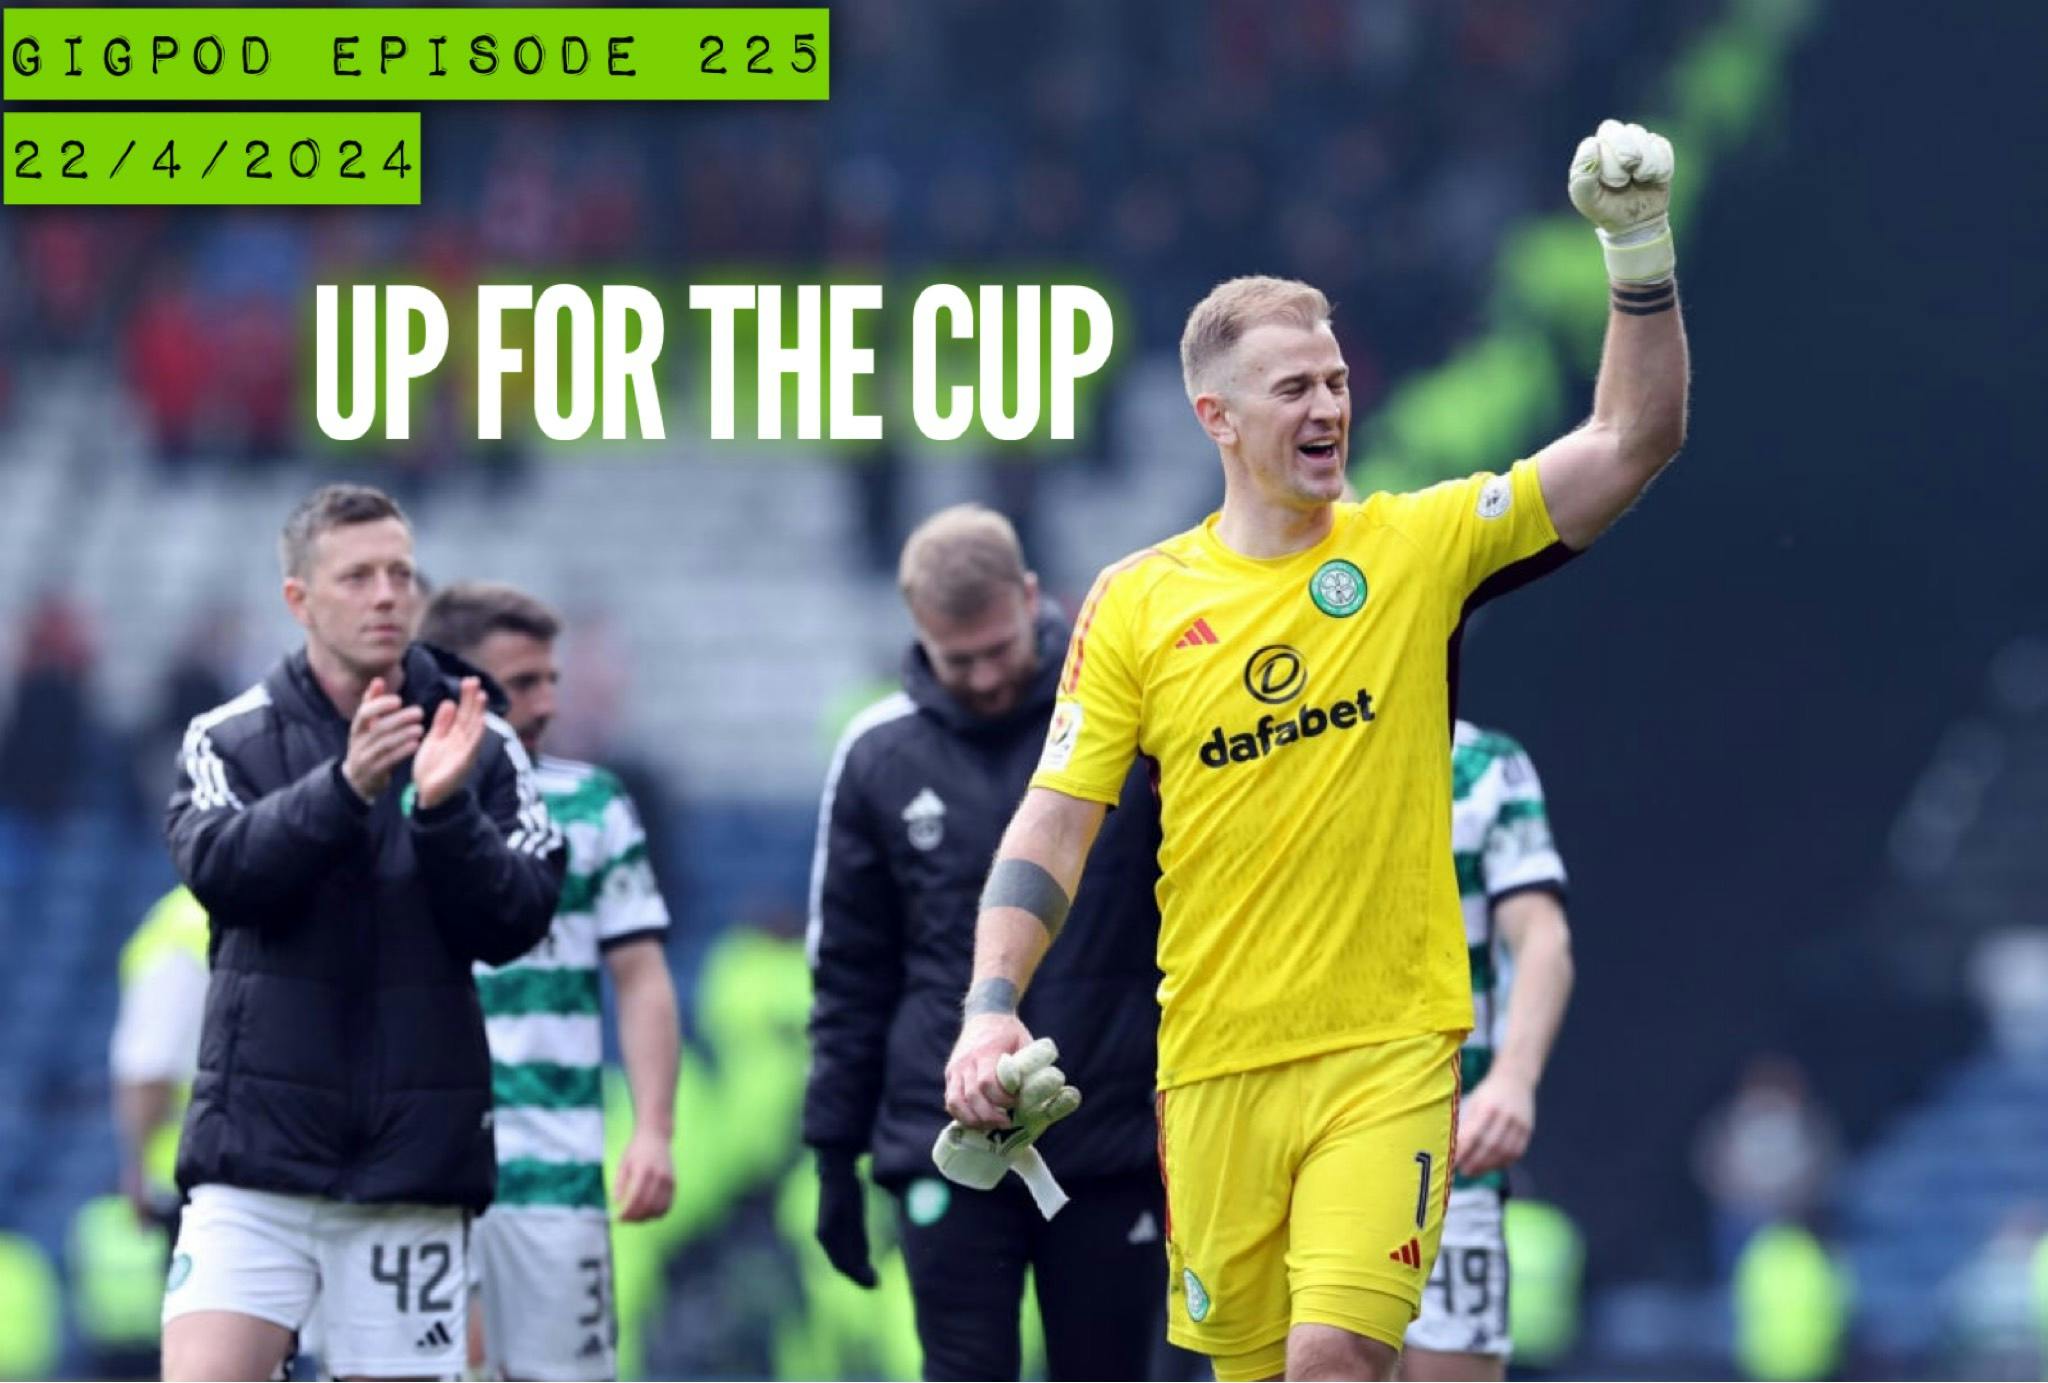 GIGPOD EP 225: UP FOR THE CUP